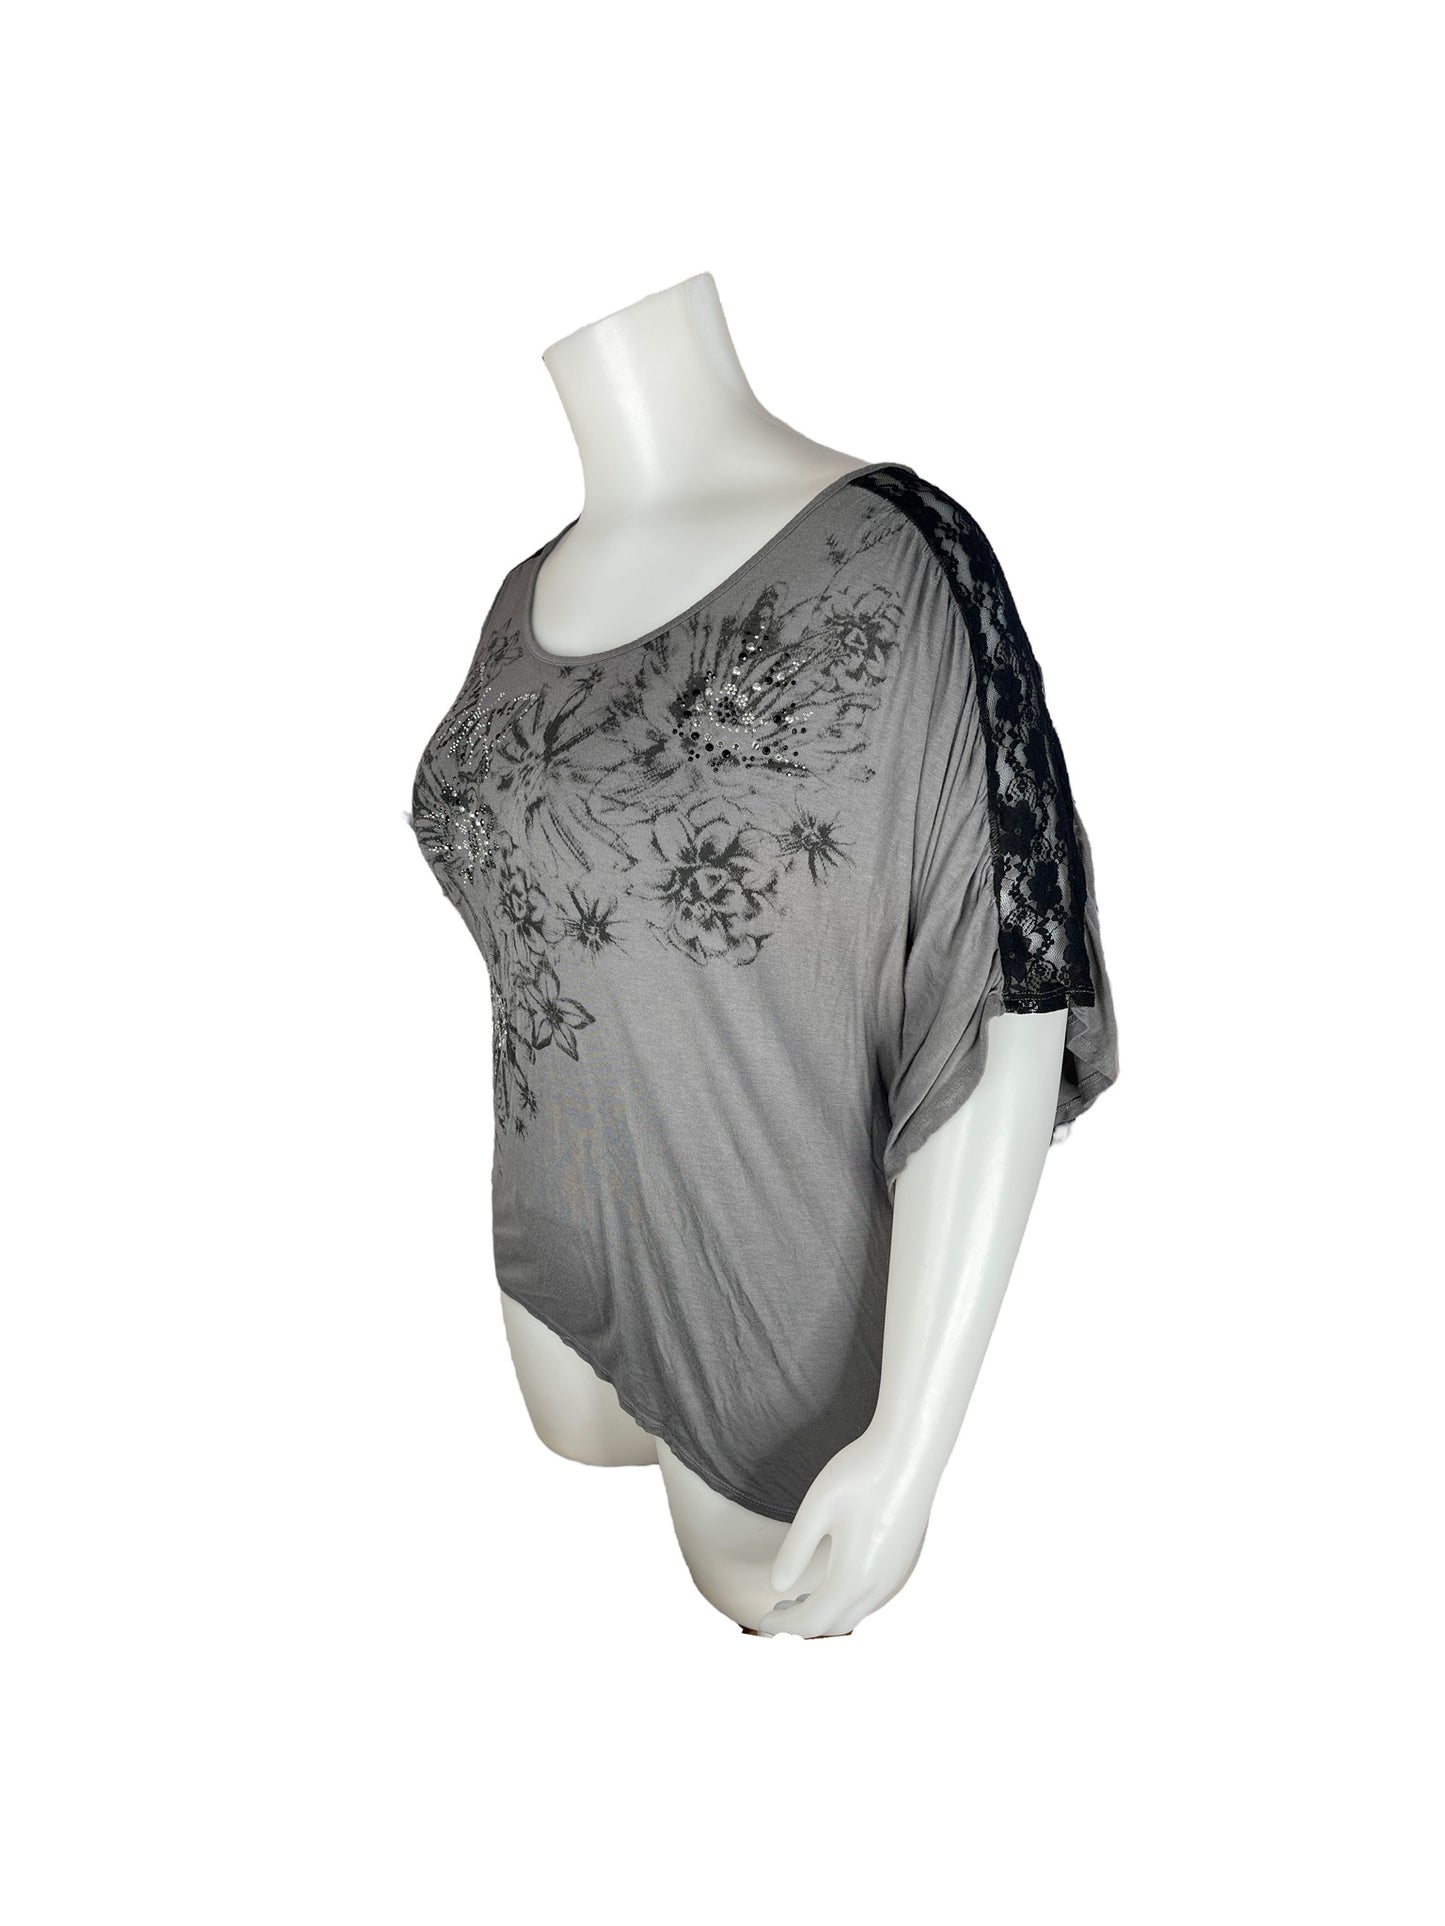 "George" Lace-shouldered Graphic Grey Shirt with Bejeweling (4X)